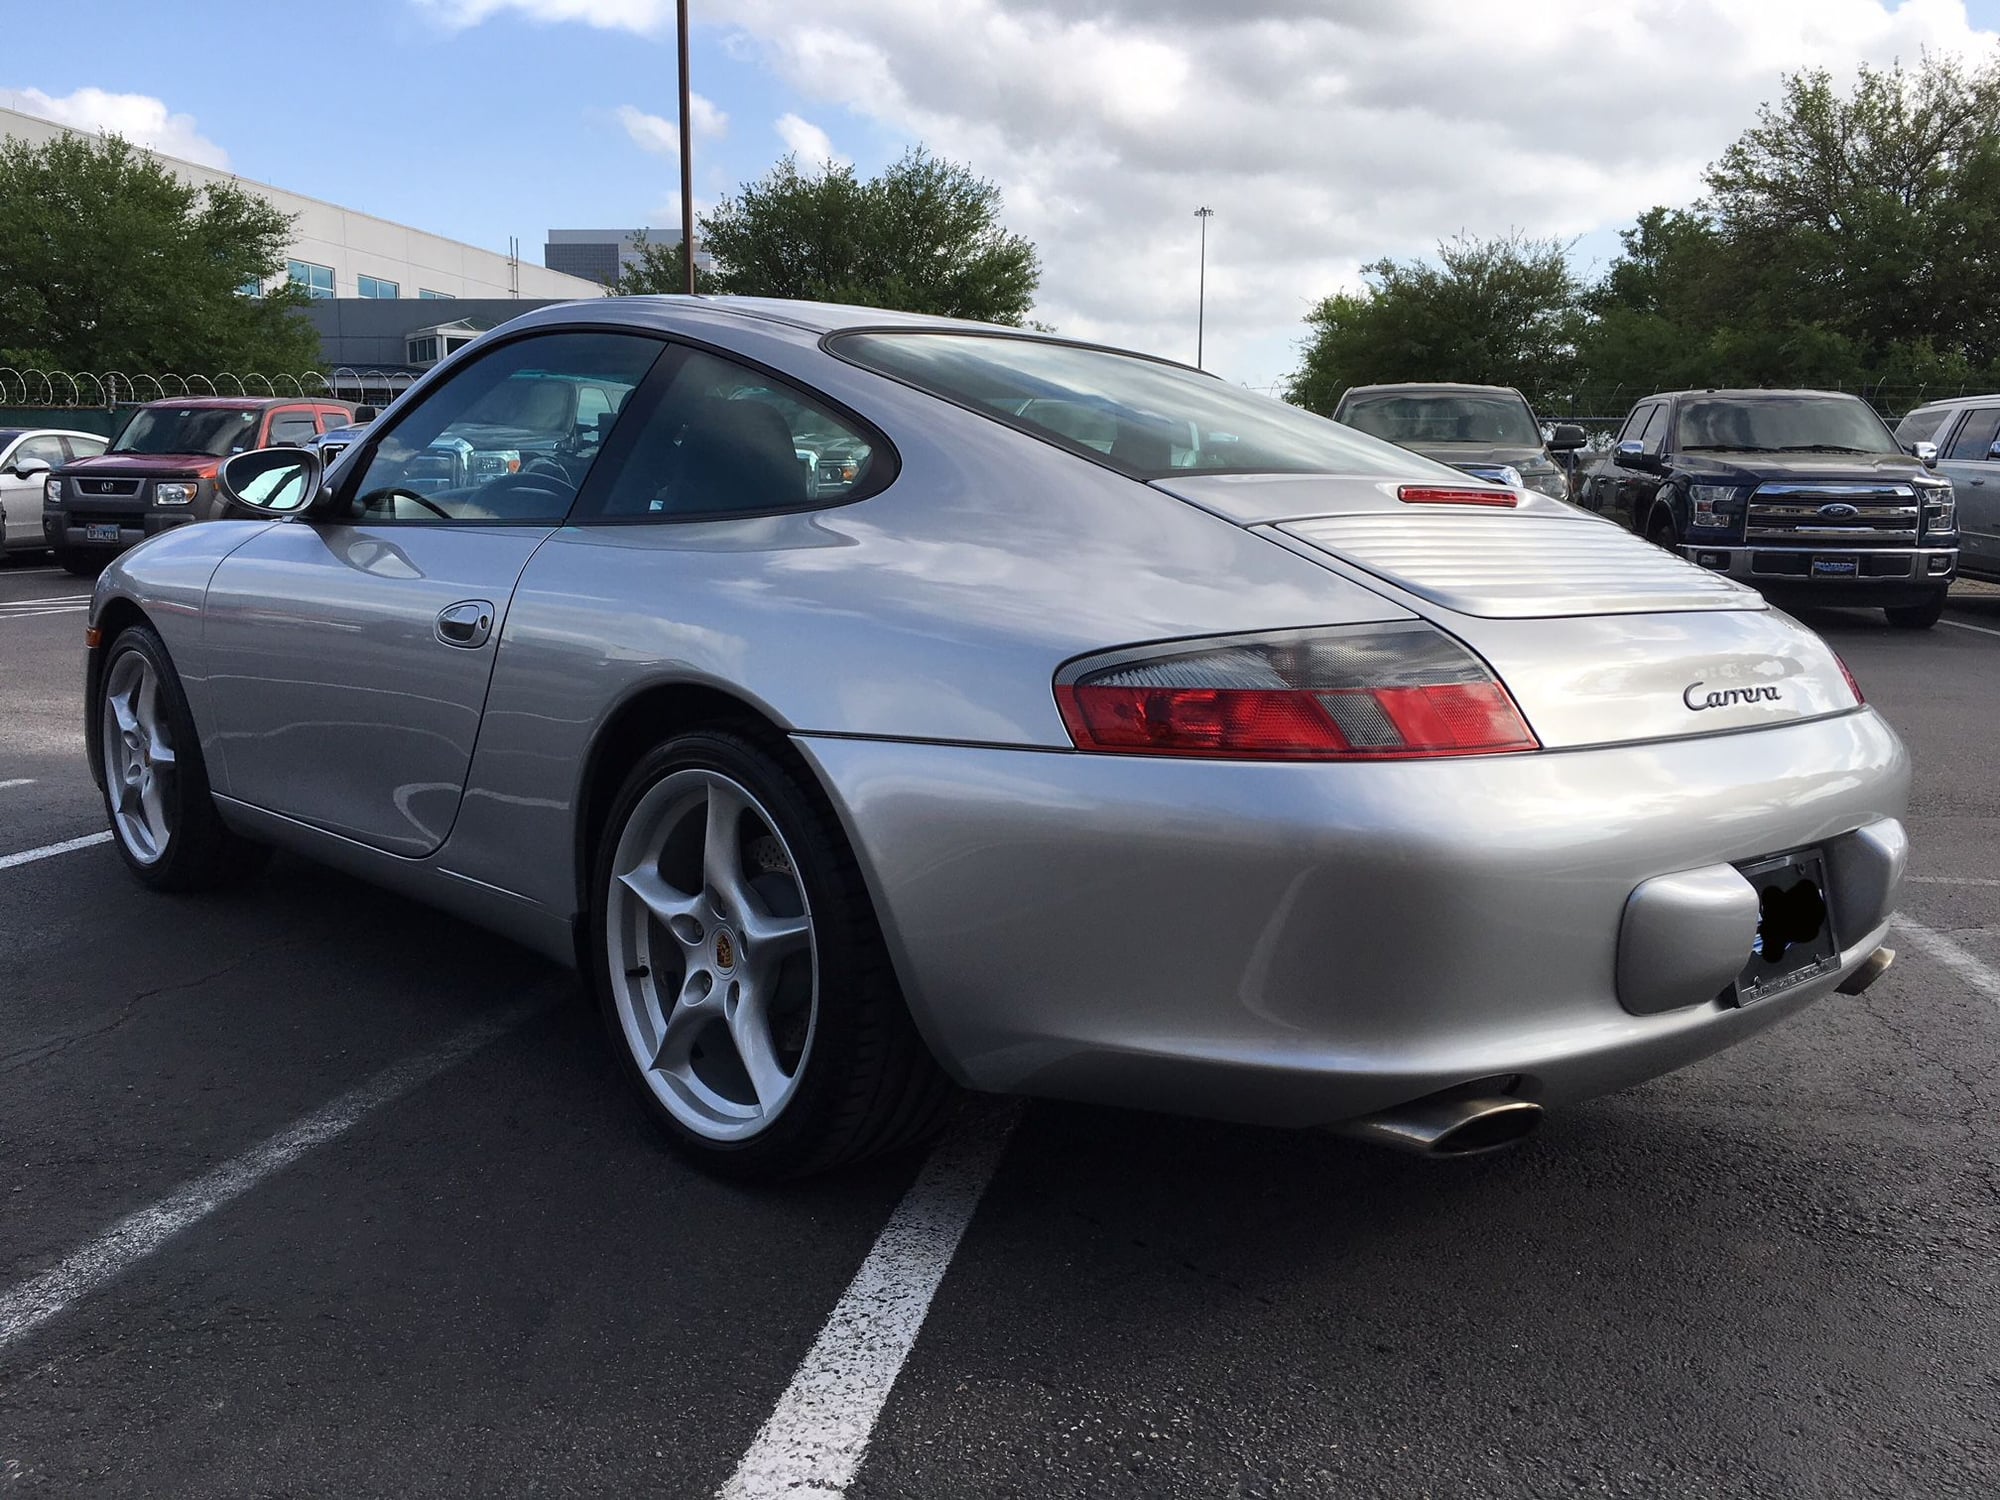 2004 Porsche 911 - 9300 mile 996 C2 -6 speed...Pristine condition...IMS done, fresh service, new tires. - Used - VIN WP0AA29934S620298 - 9,300 Miles - 2WD - Manual - Coupe - Silver - Alexandria, VA 22308, United States